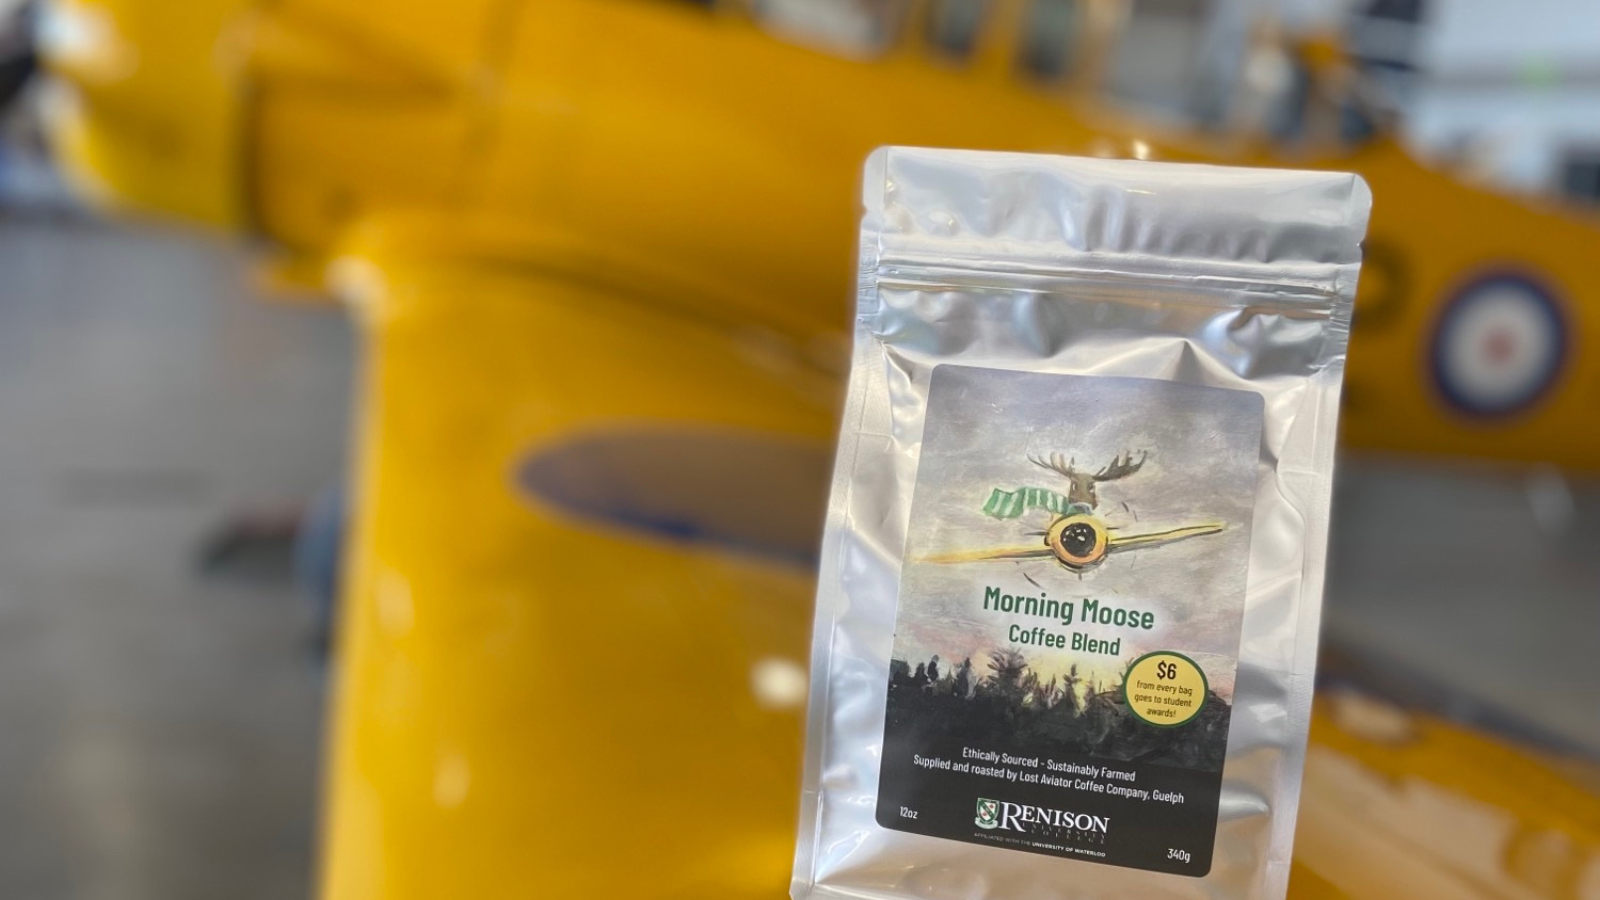 A bag of Renison coffee sitting on the wing of a yellow aircraft